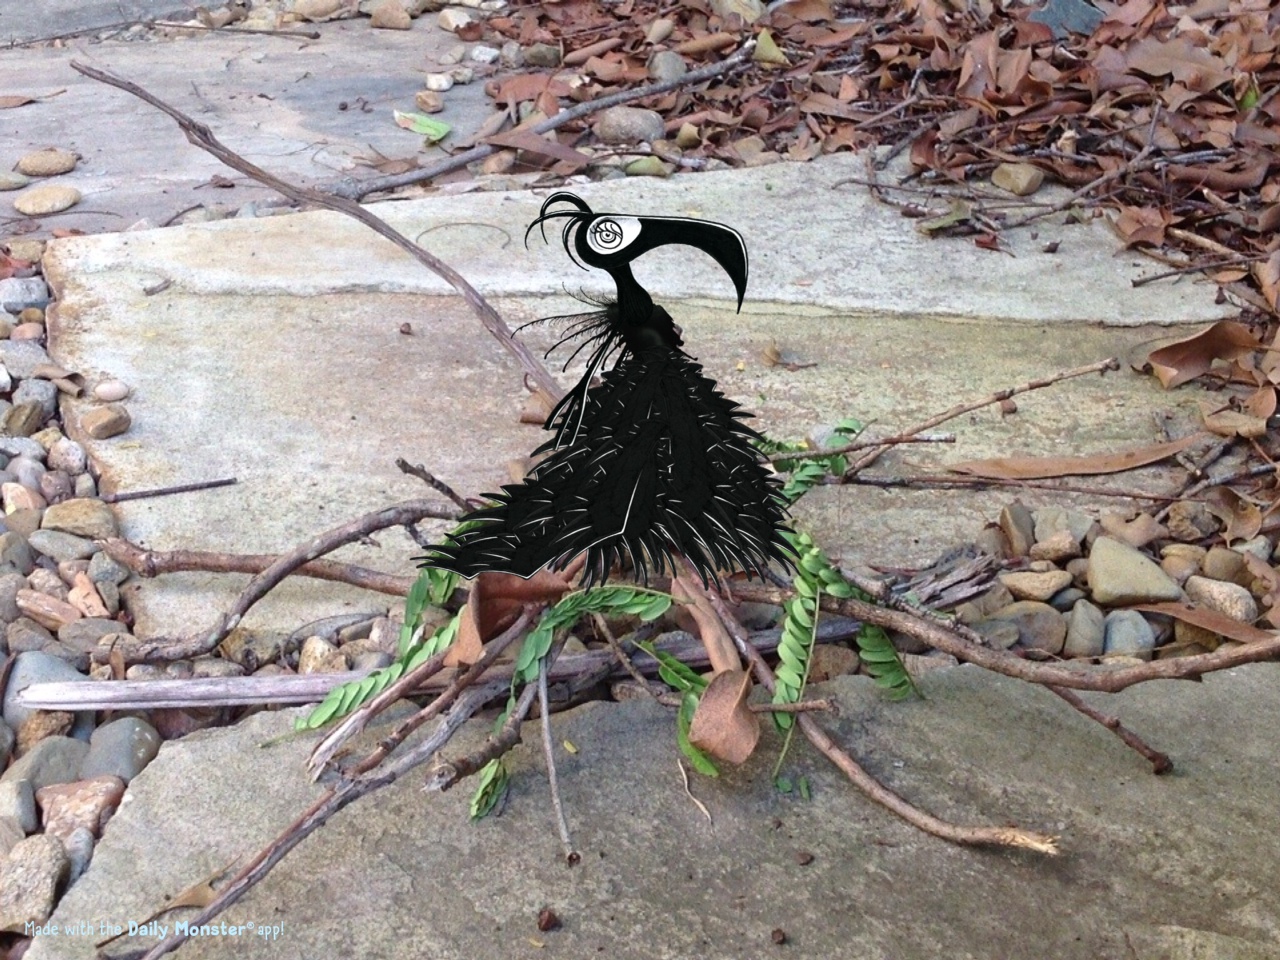 Bird on a nest created using a photograph and matching ink-blot monster created in the Daily Monster app